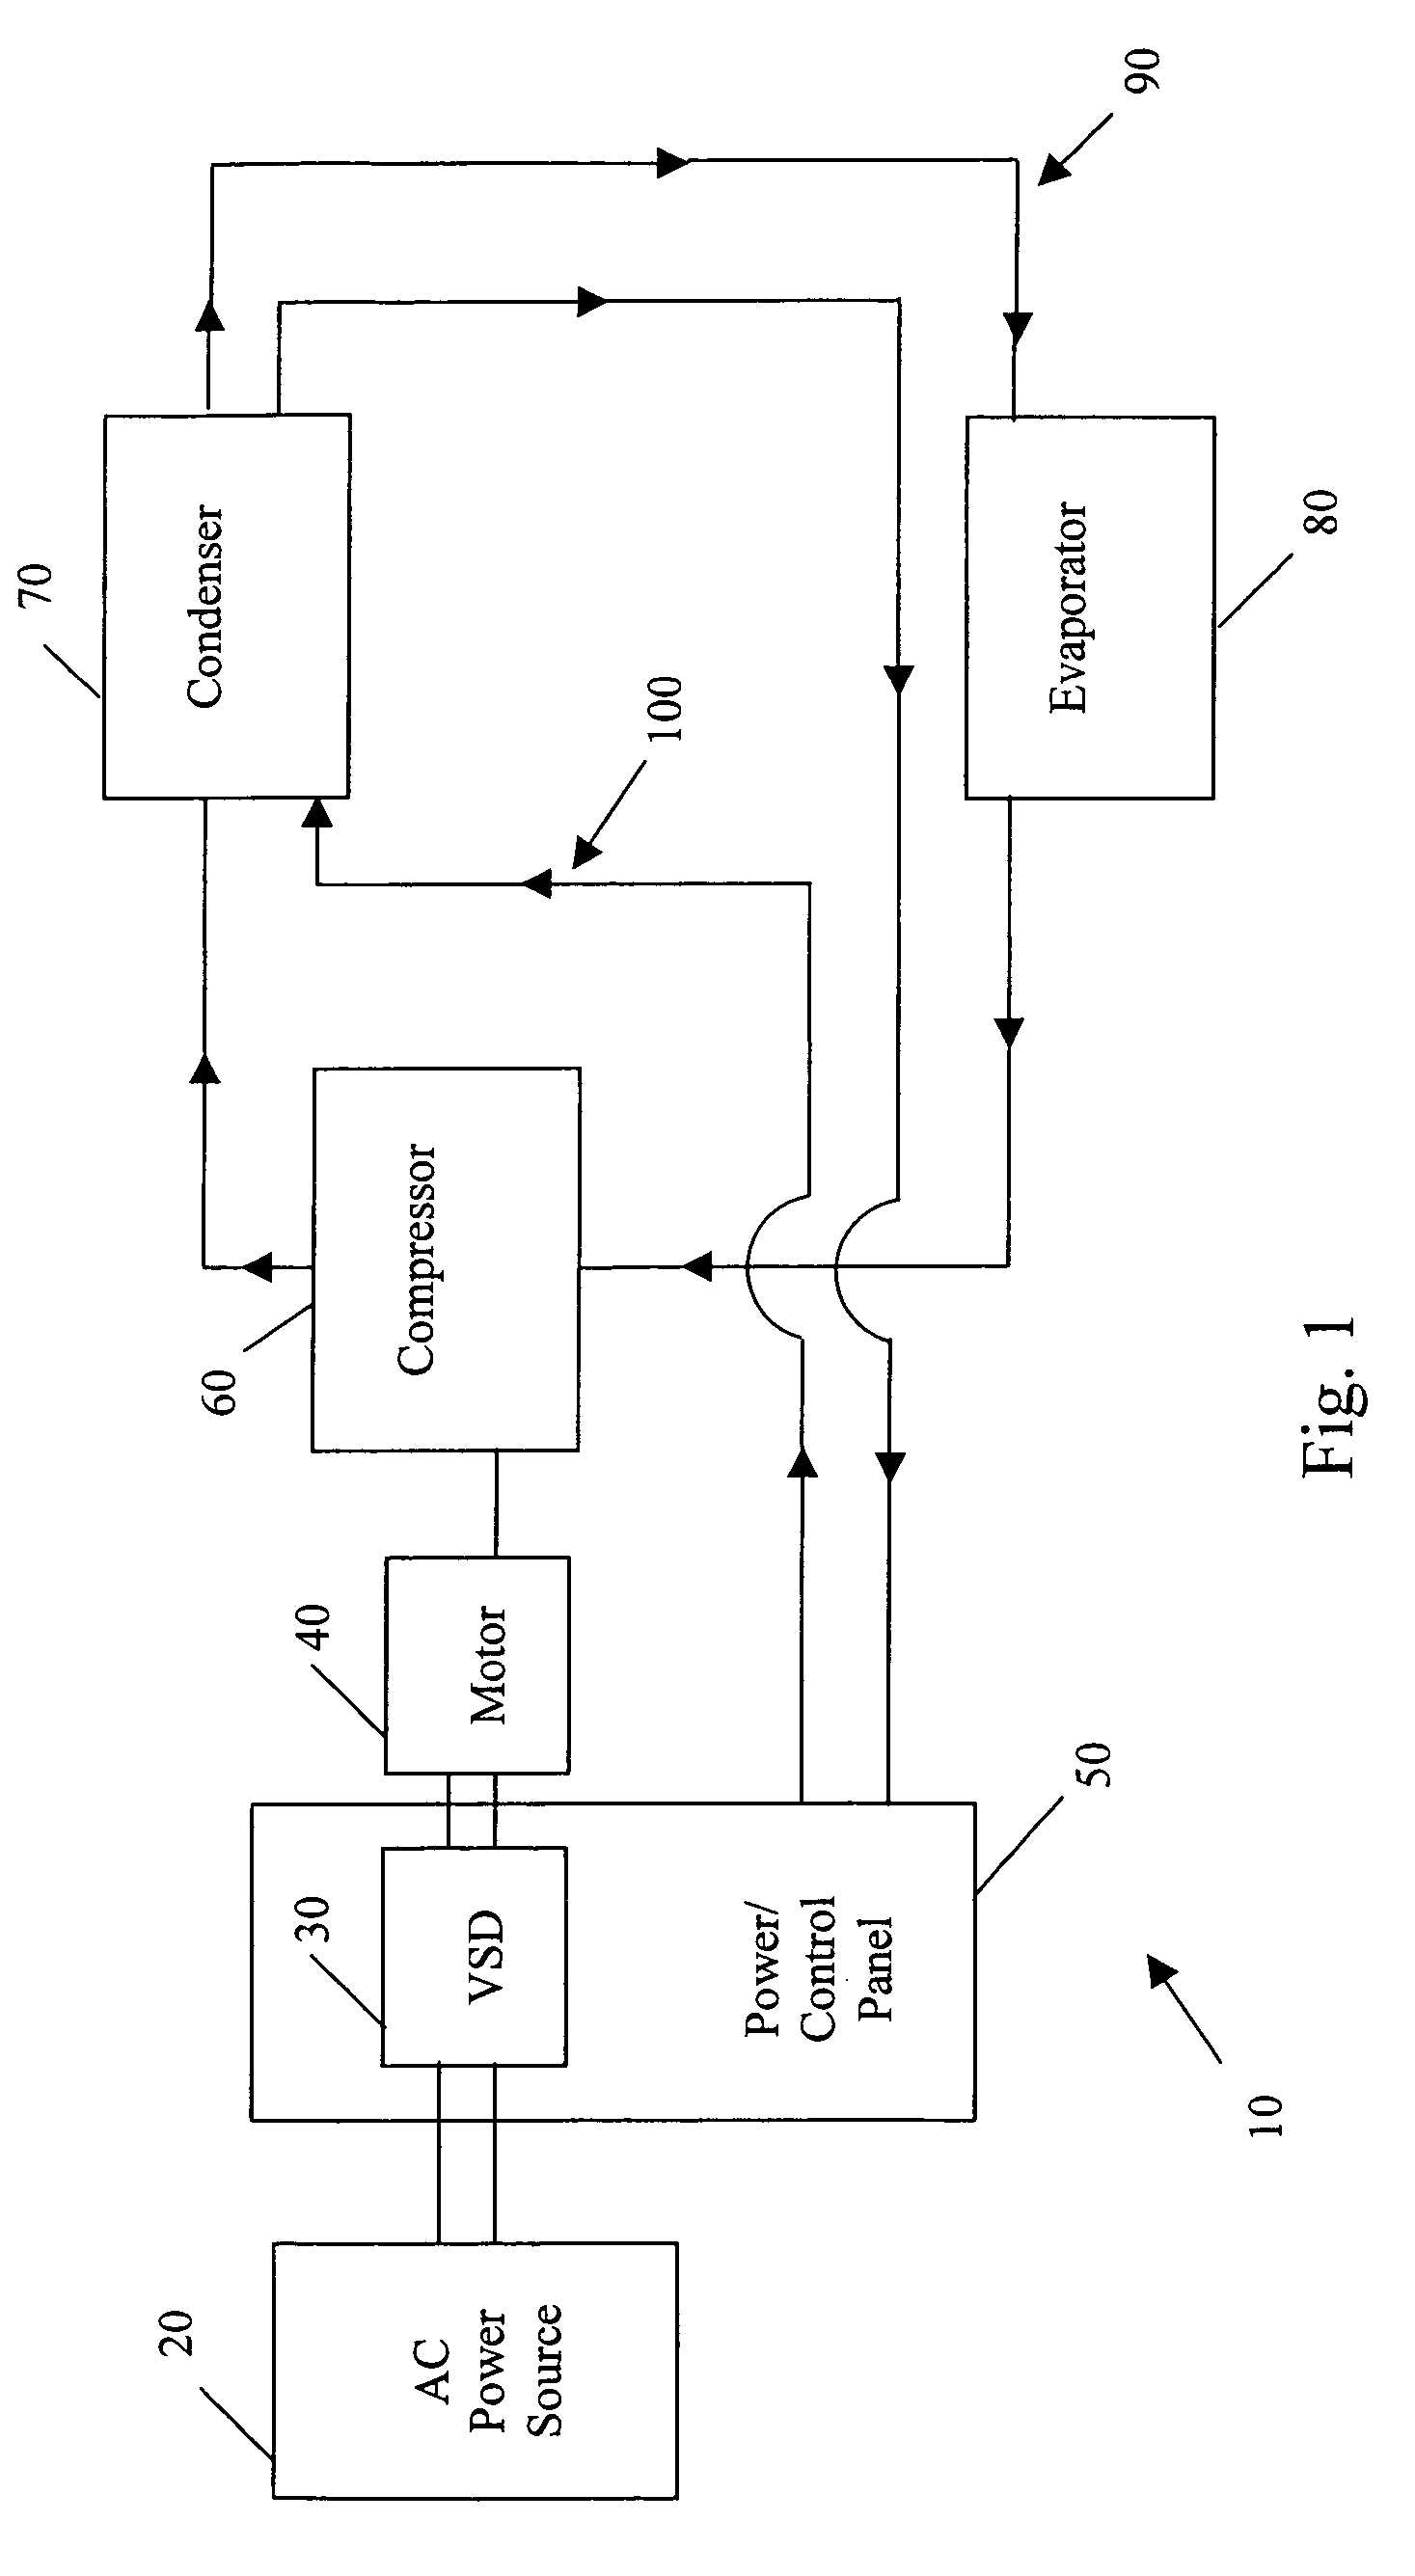 Electronic component cooling system for an air-cooled chiller